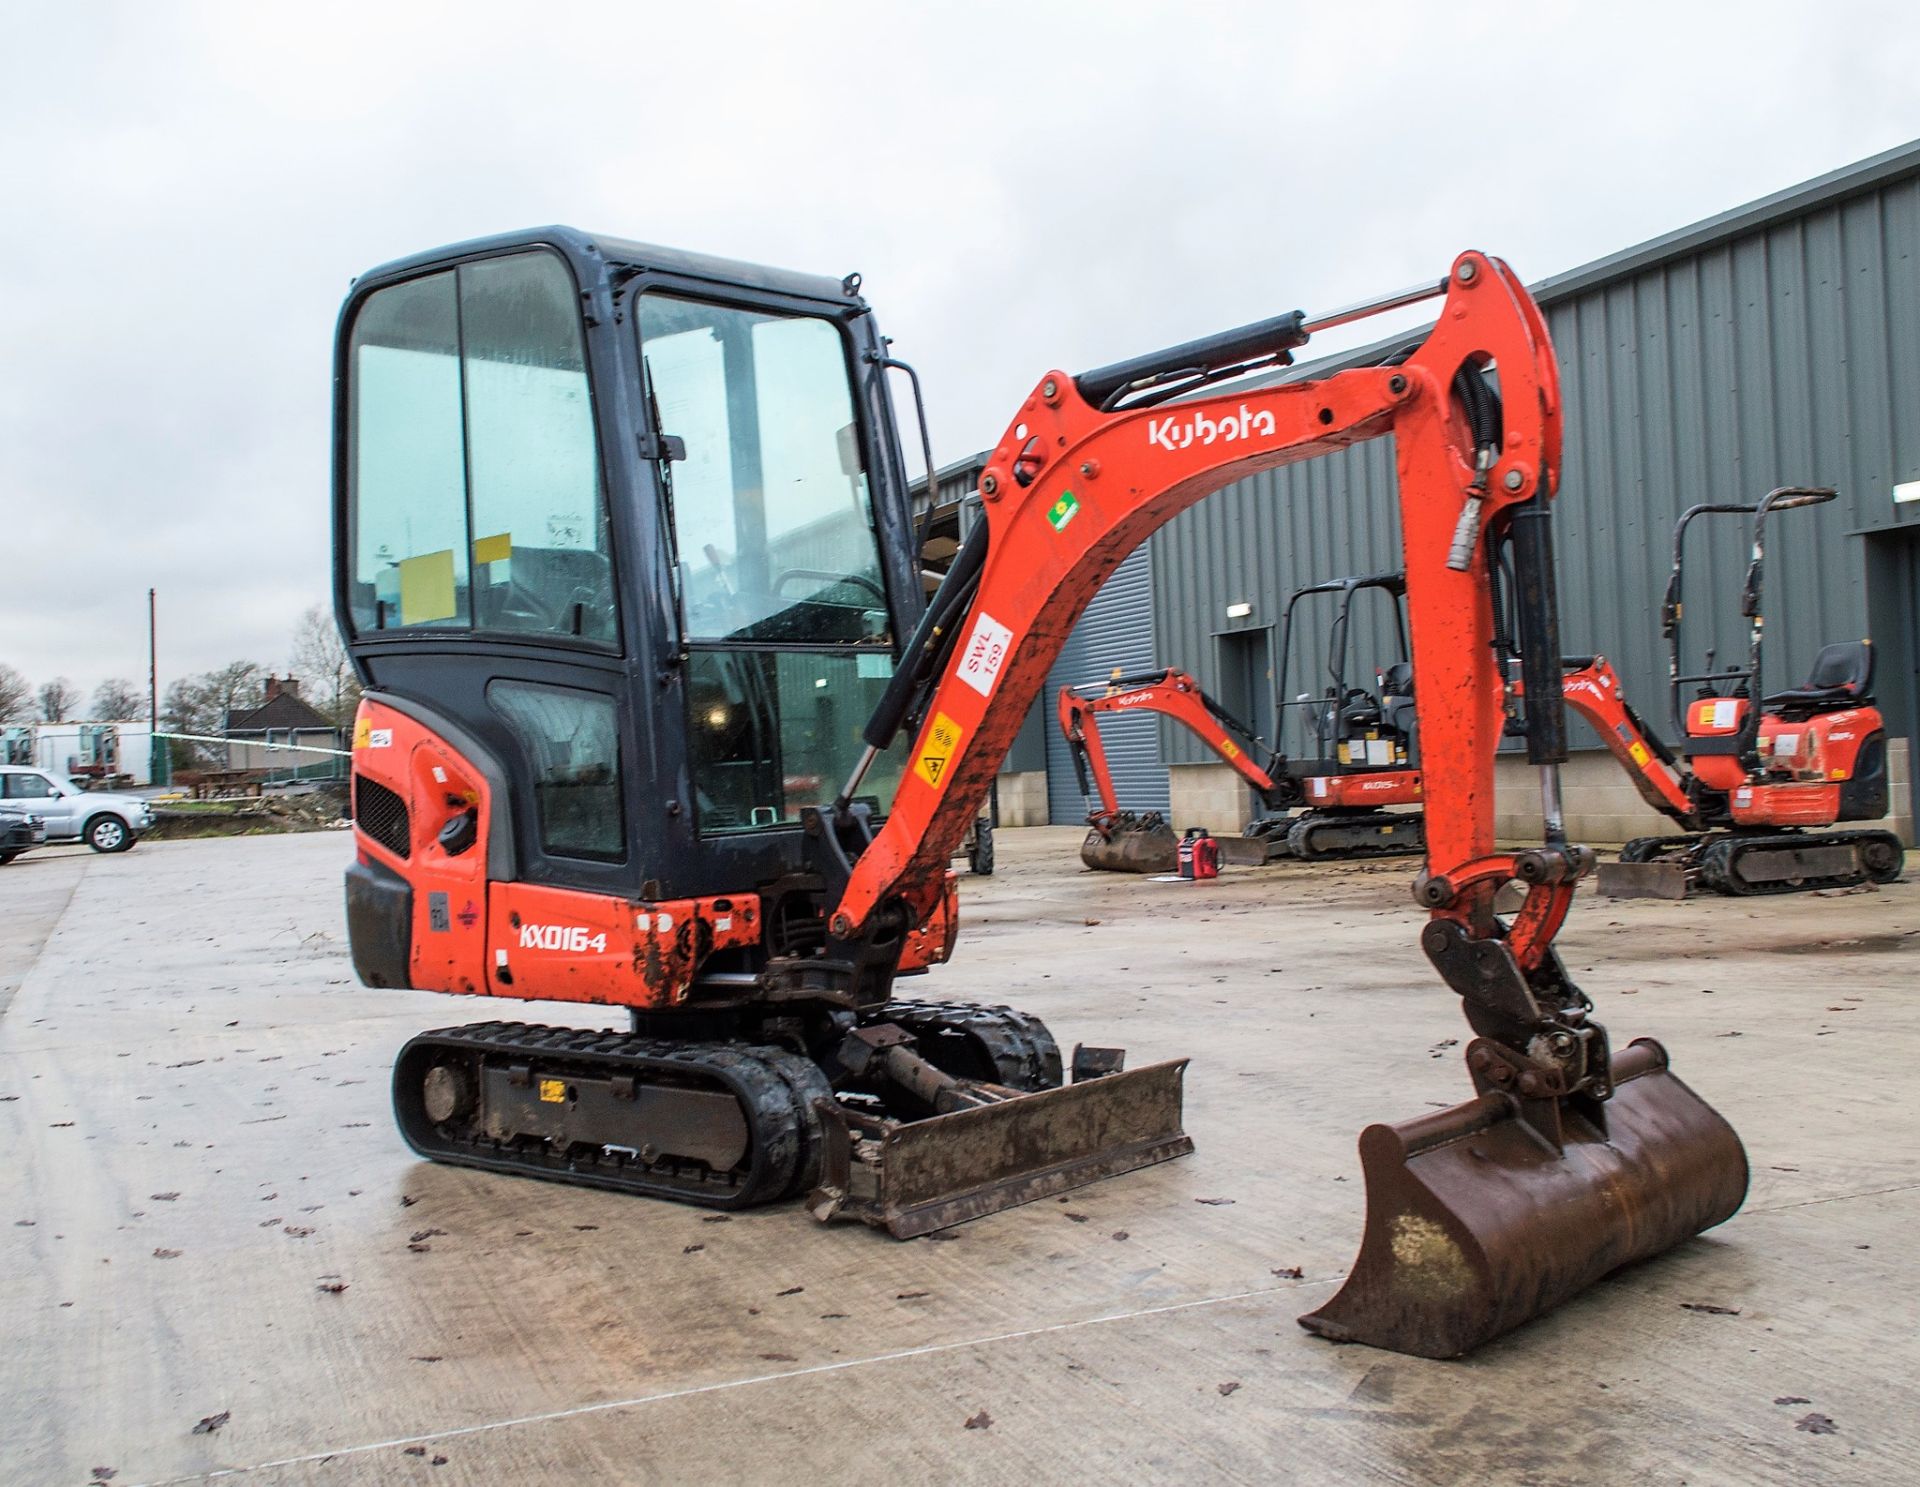 Kubota KX016-4 1.5 tonne rubber tracked excavator Year: 2014 S/N: 57529 Recorded Hours: 2638 - Image 2 of 23